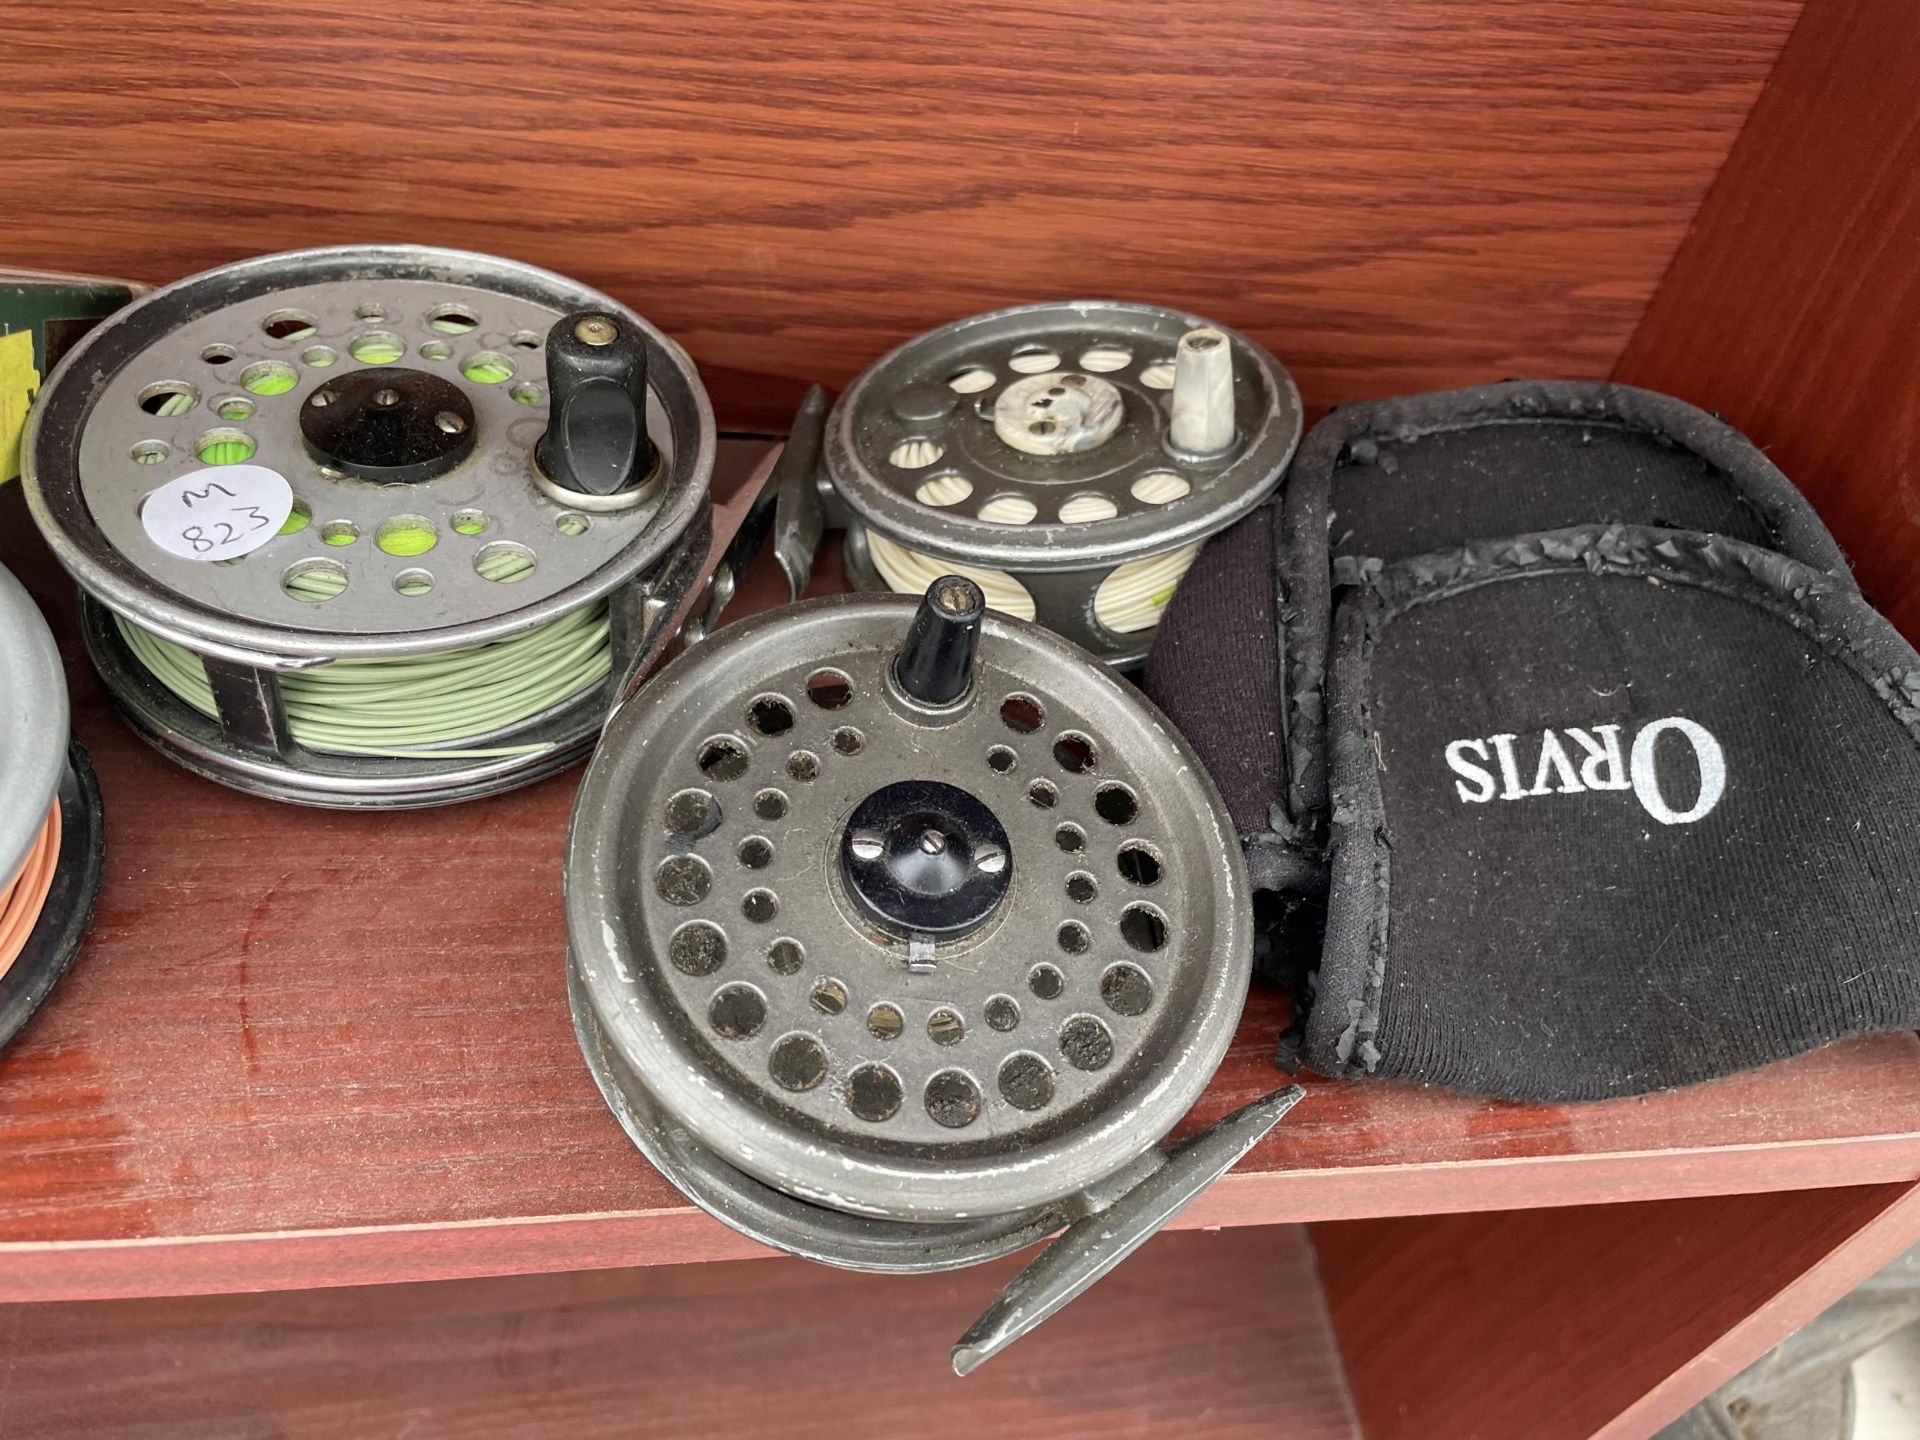 EIGHT VARIOUS FLY FISHING REELS AND A SPOOL OF FLY LINE - Image 2 of 4